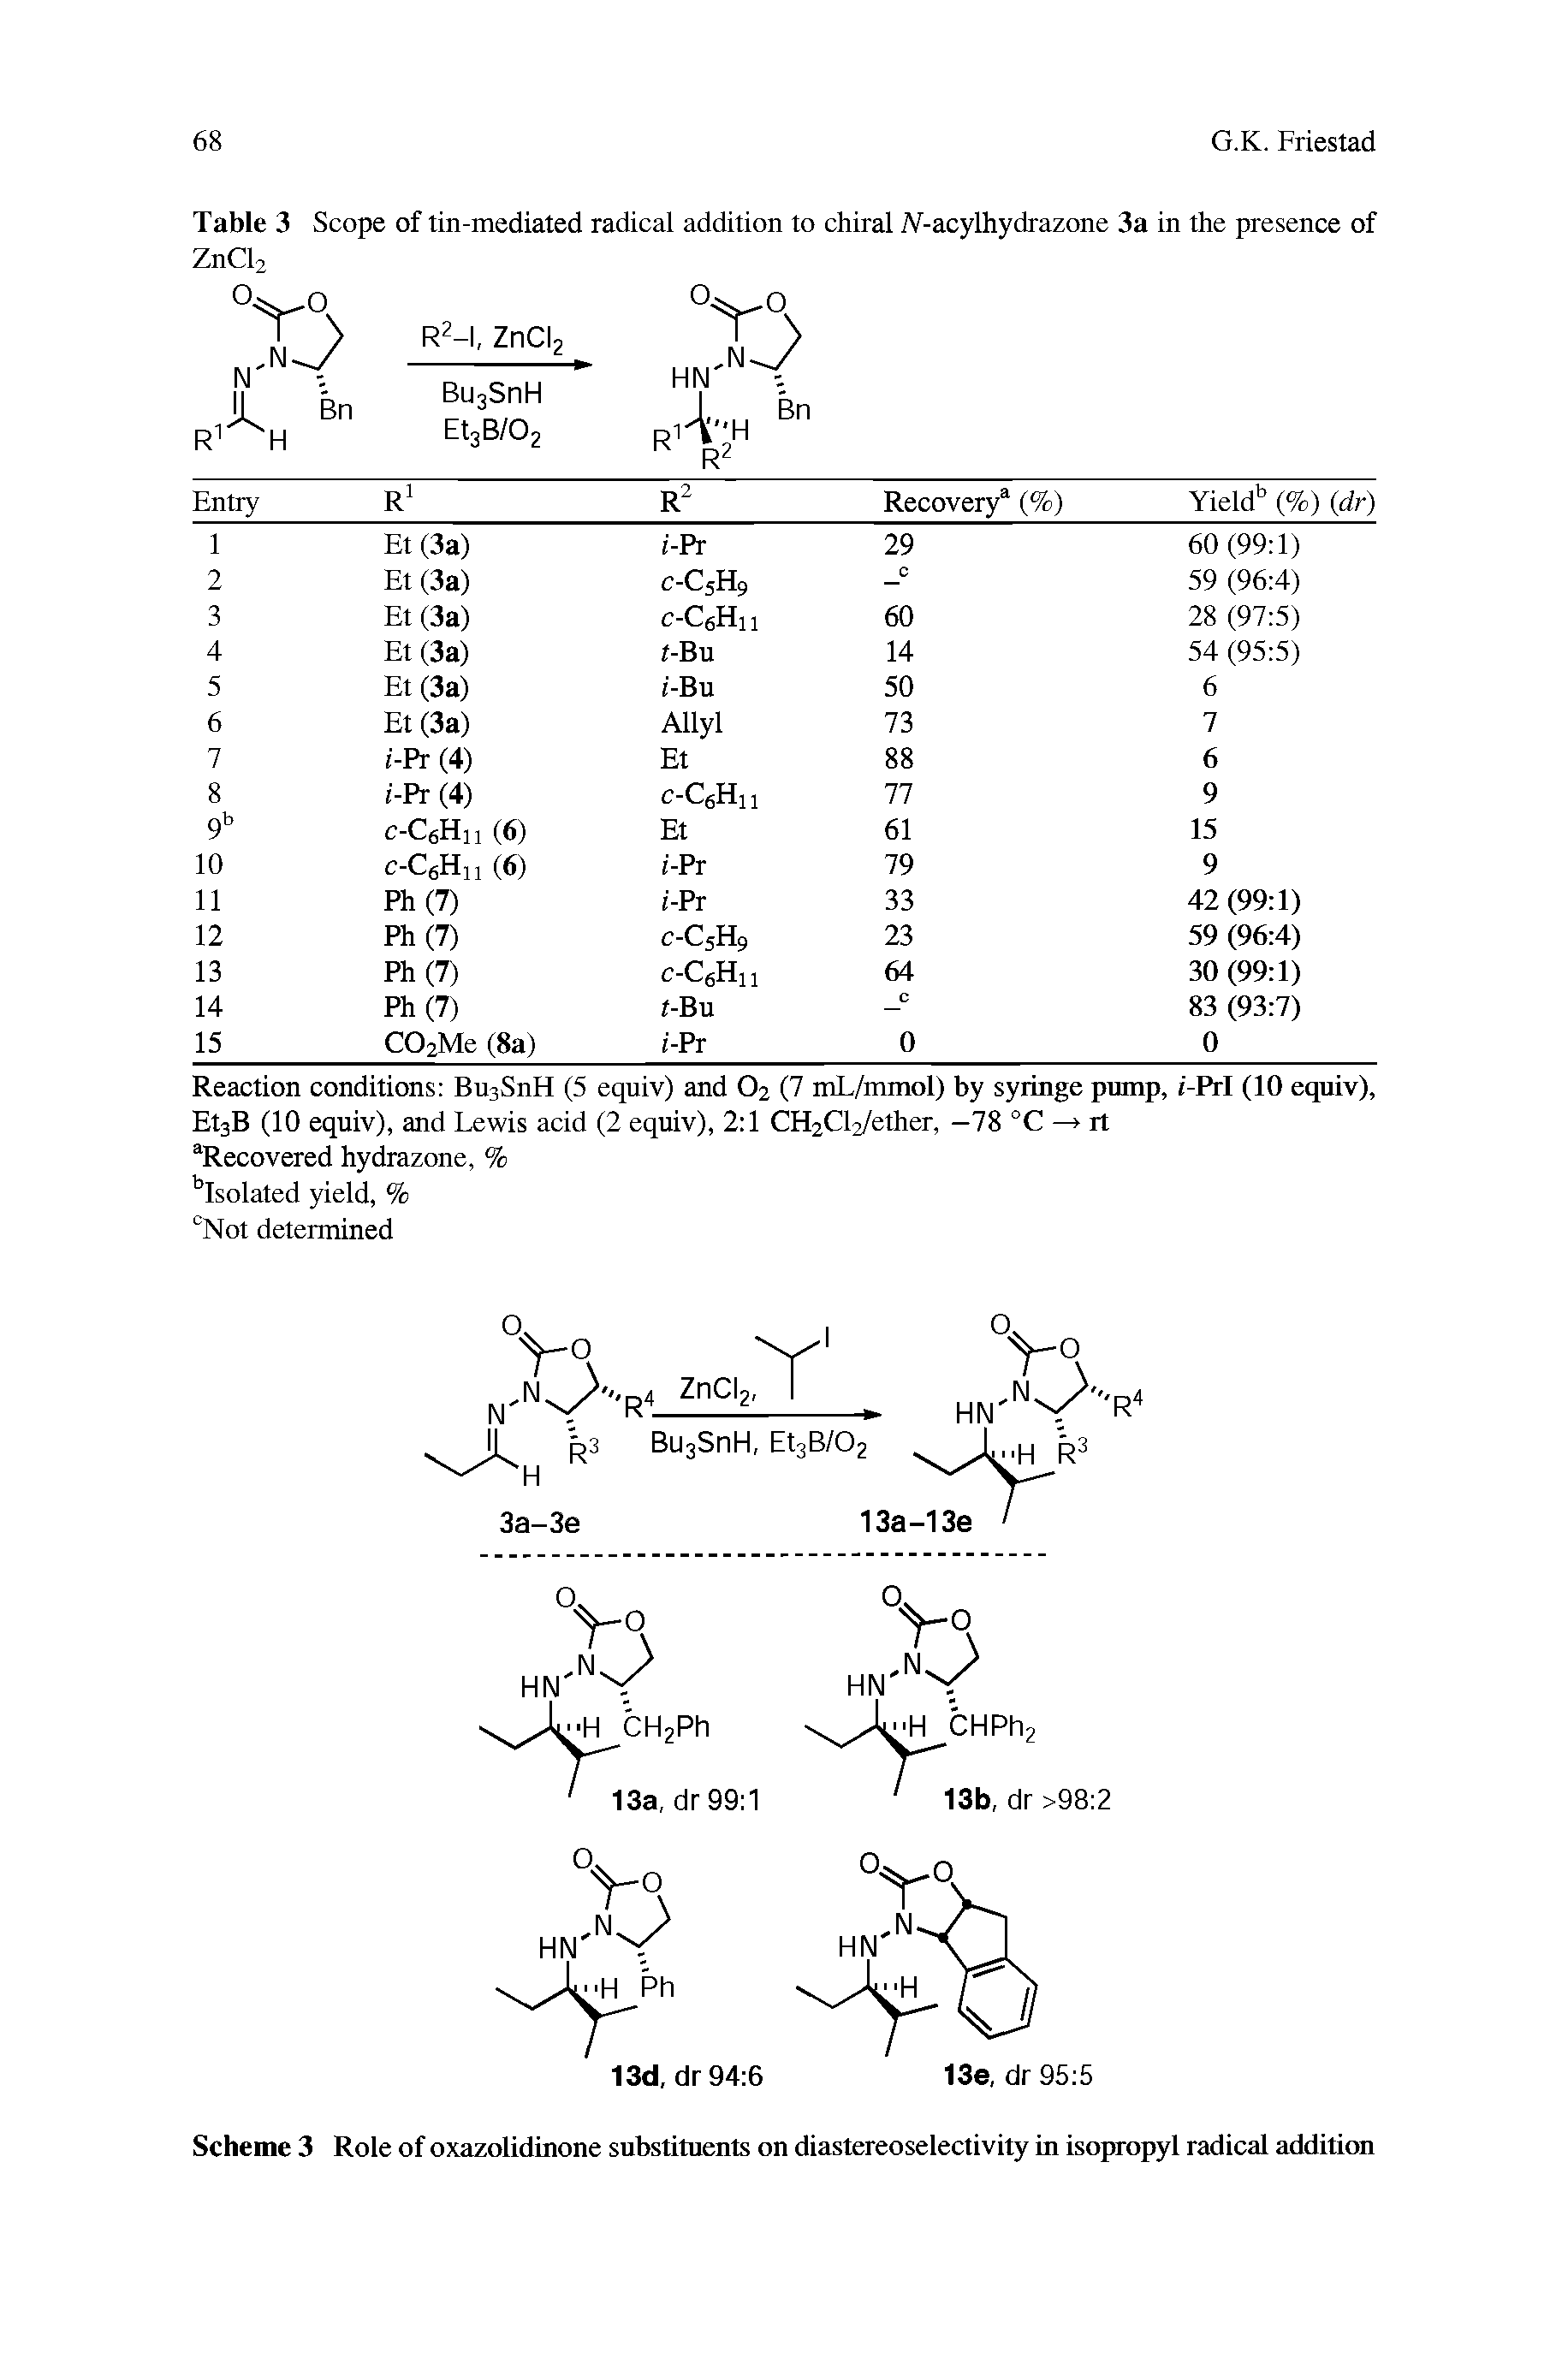 Table 3 Scope of tin-mediated radical addition to chiral IV-acylhydrazone 3a in the presence of ZnCl2...